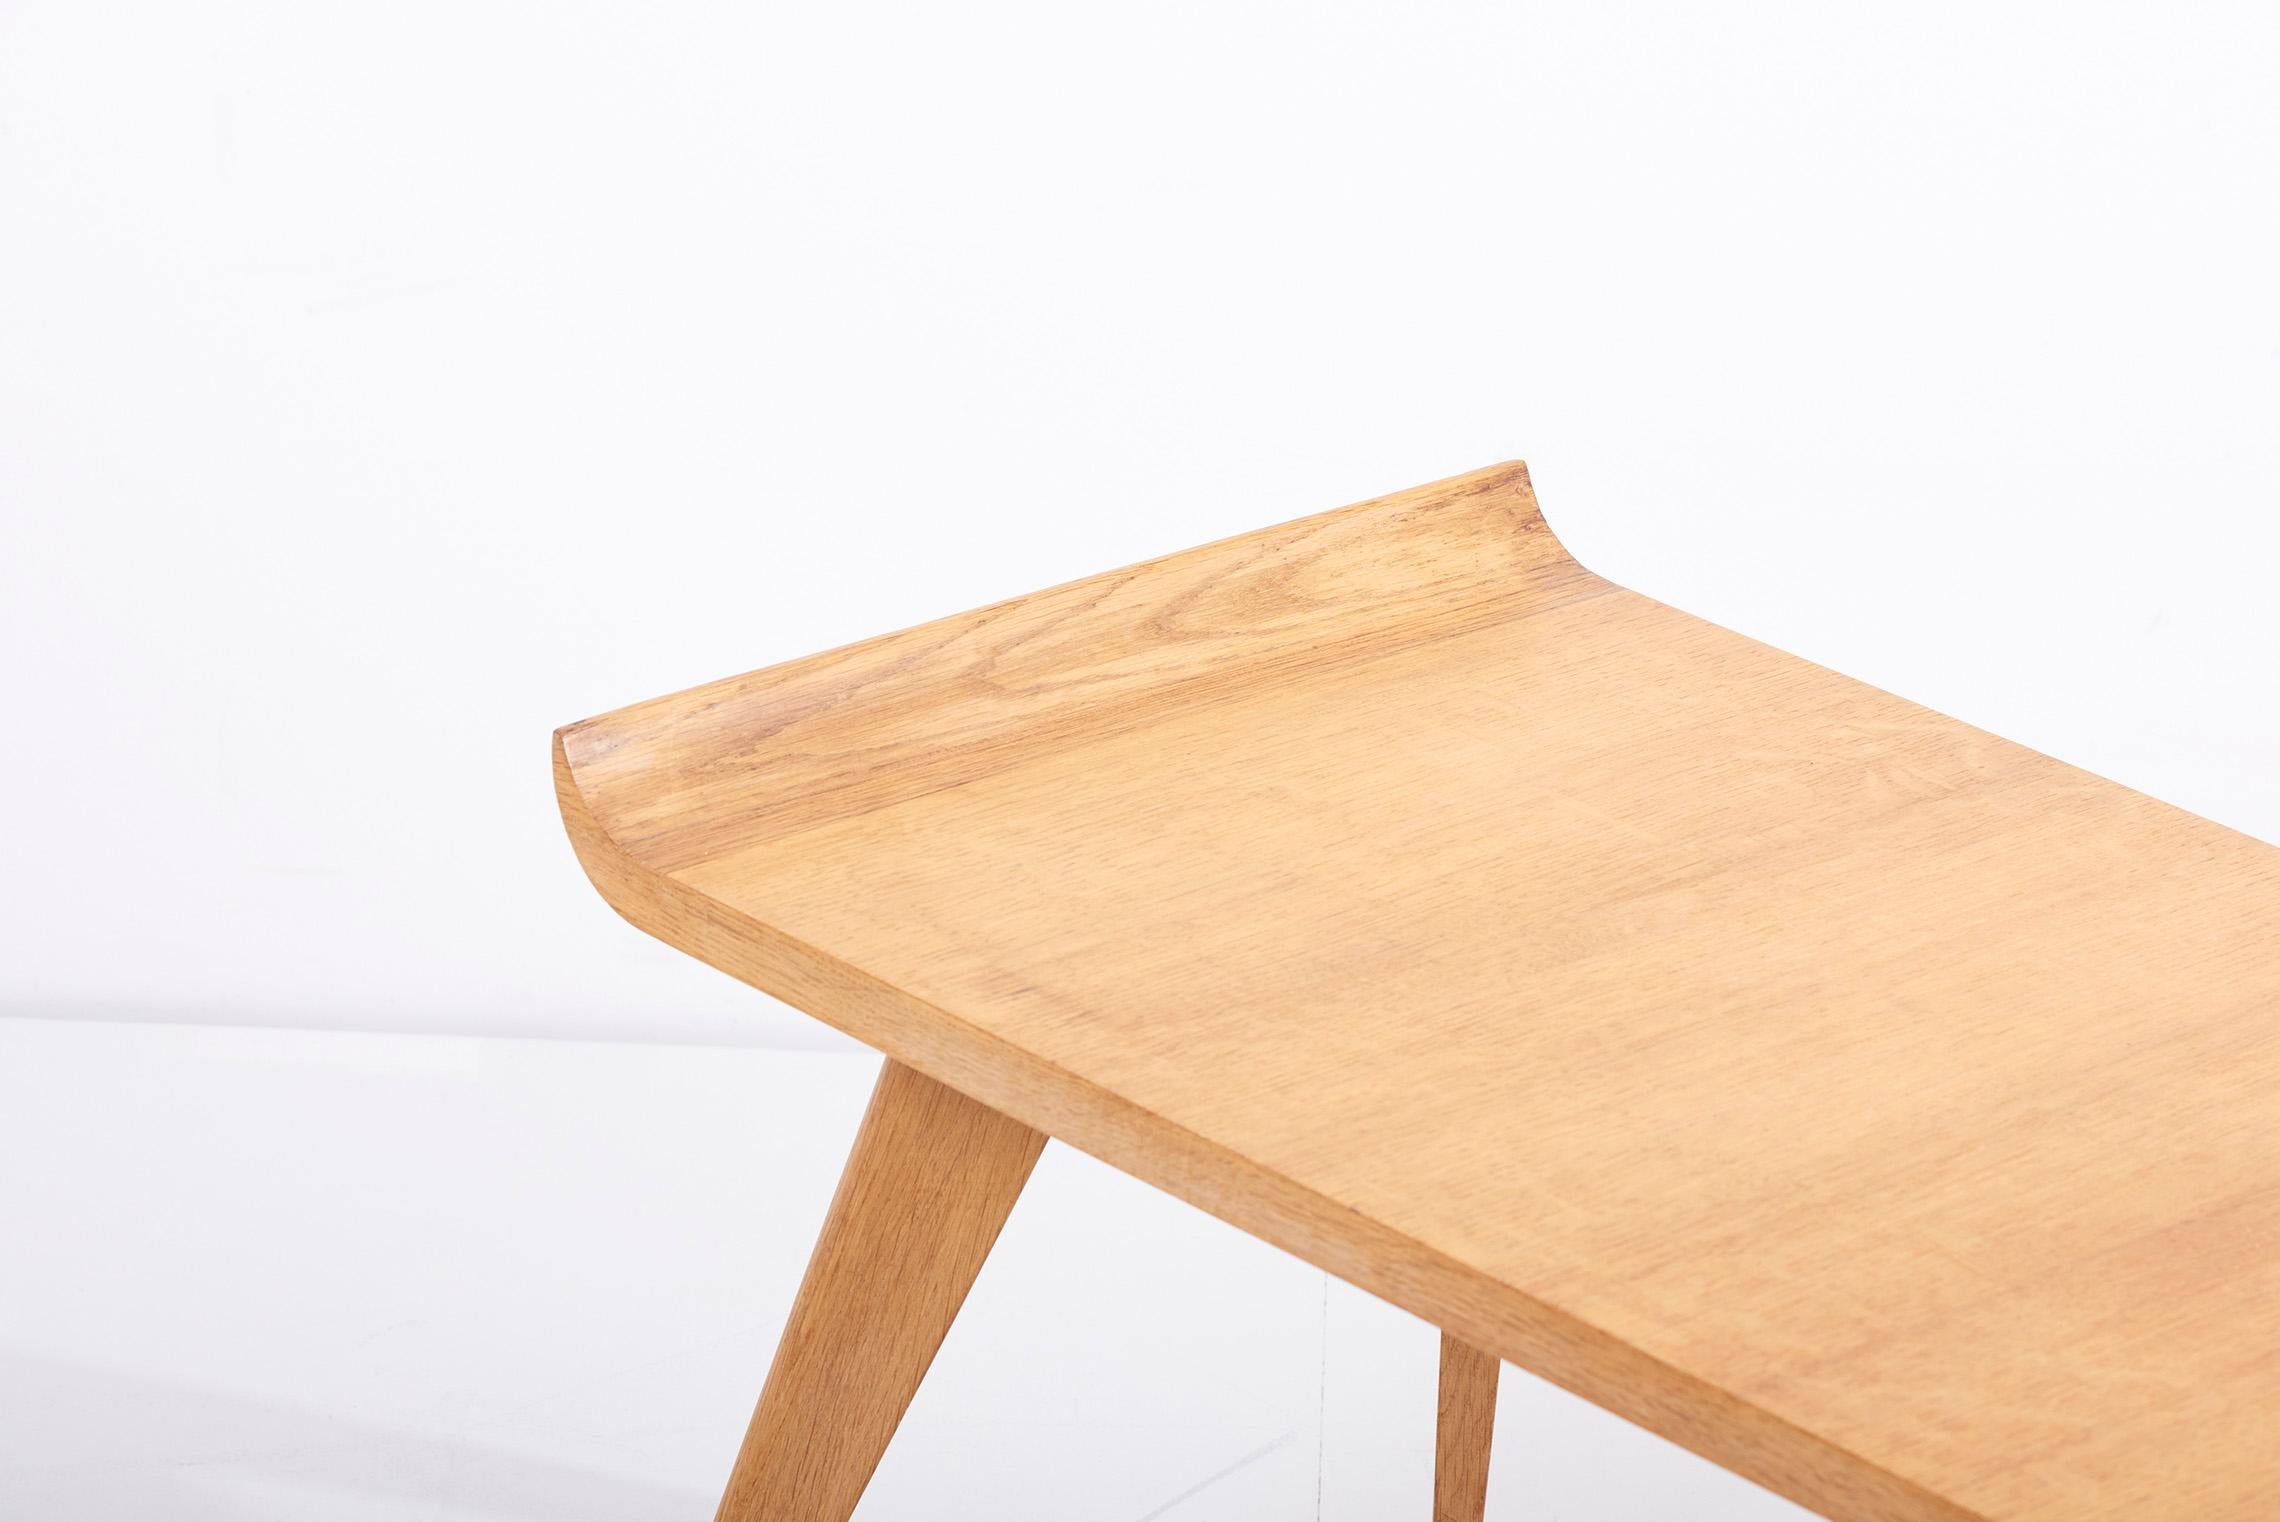 Mid-20th Century Spanish Modernist Pagoda Coffee or Side Table in Oak by Manuel Barbero 1953